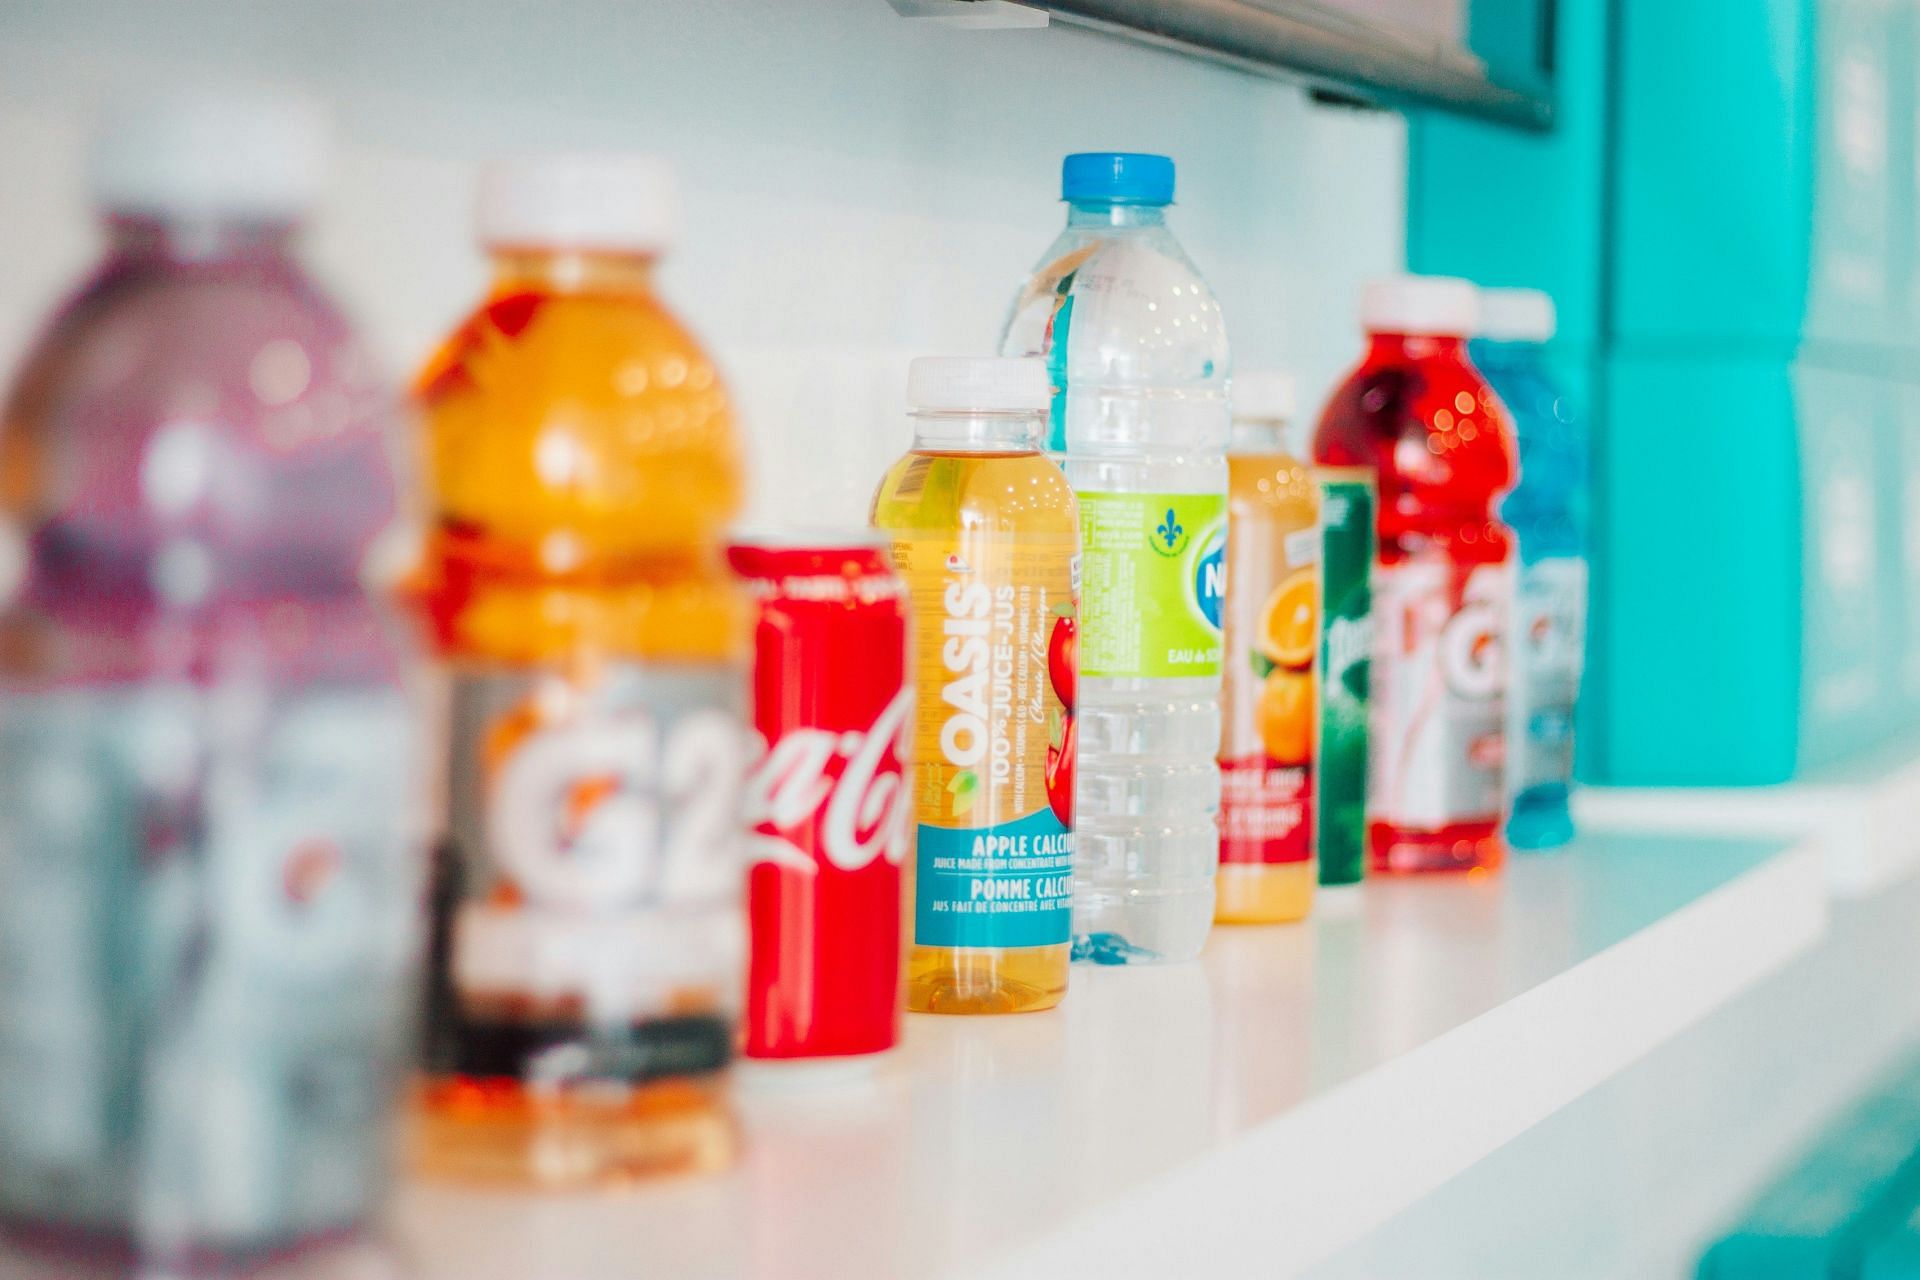 Soda too comes under the most unhealthy foods in the world (Image by Shayna Douglas/Unsplash)